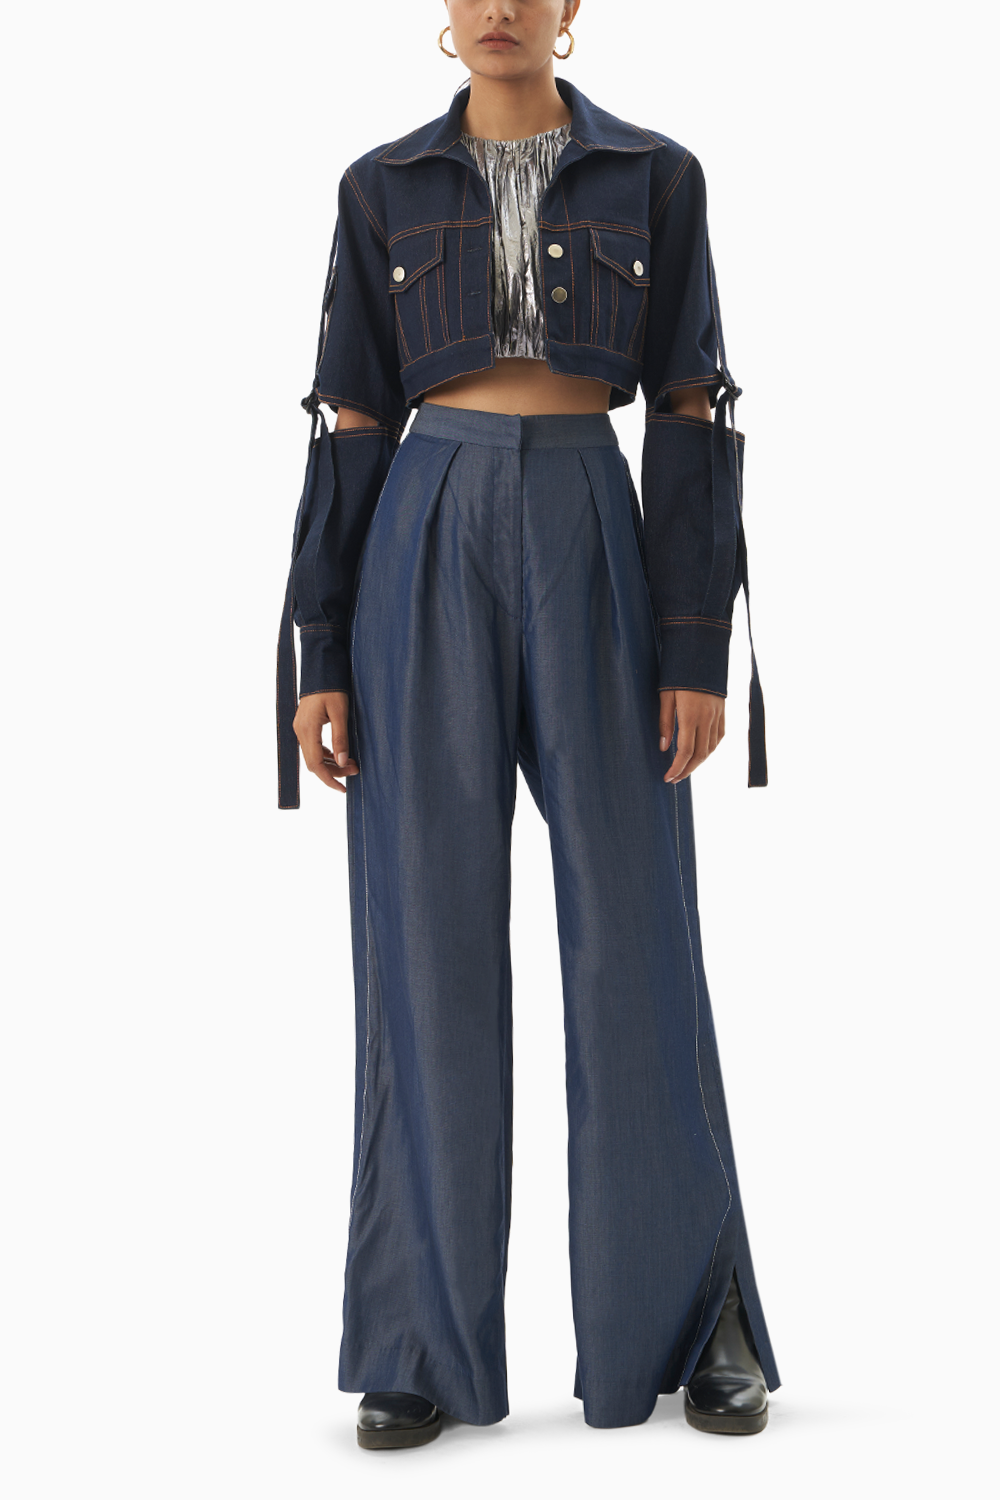 Ruched Foil Top with Denim Jacket & Trouser